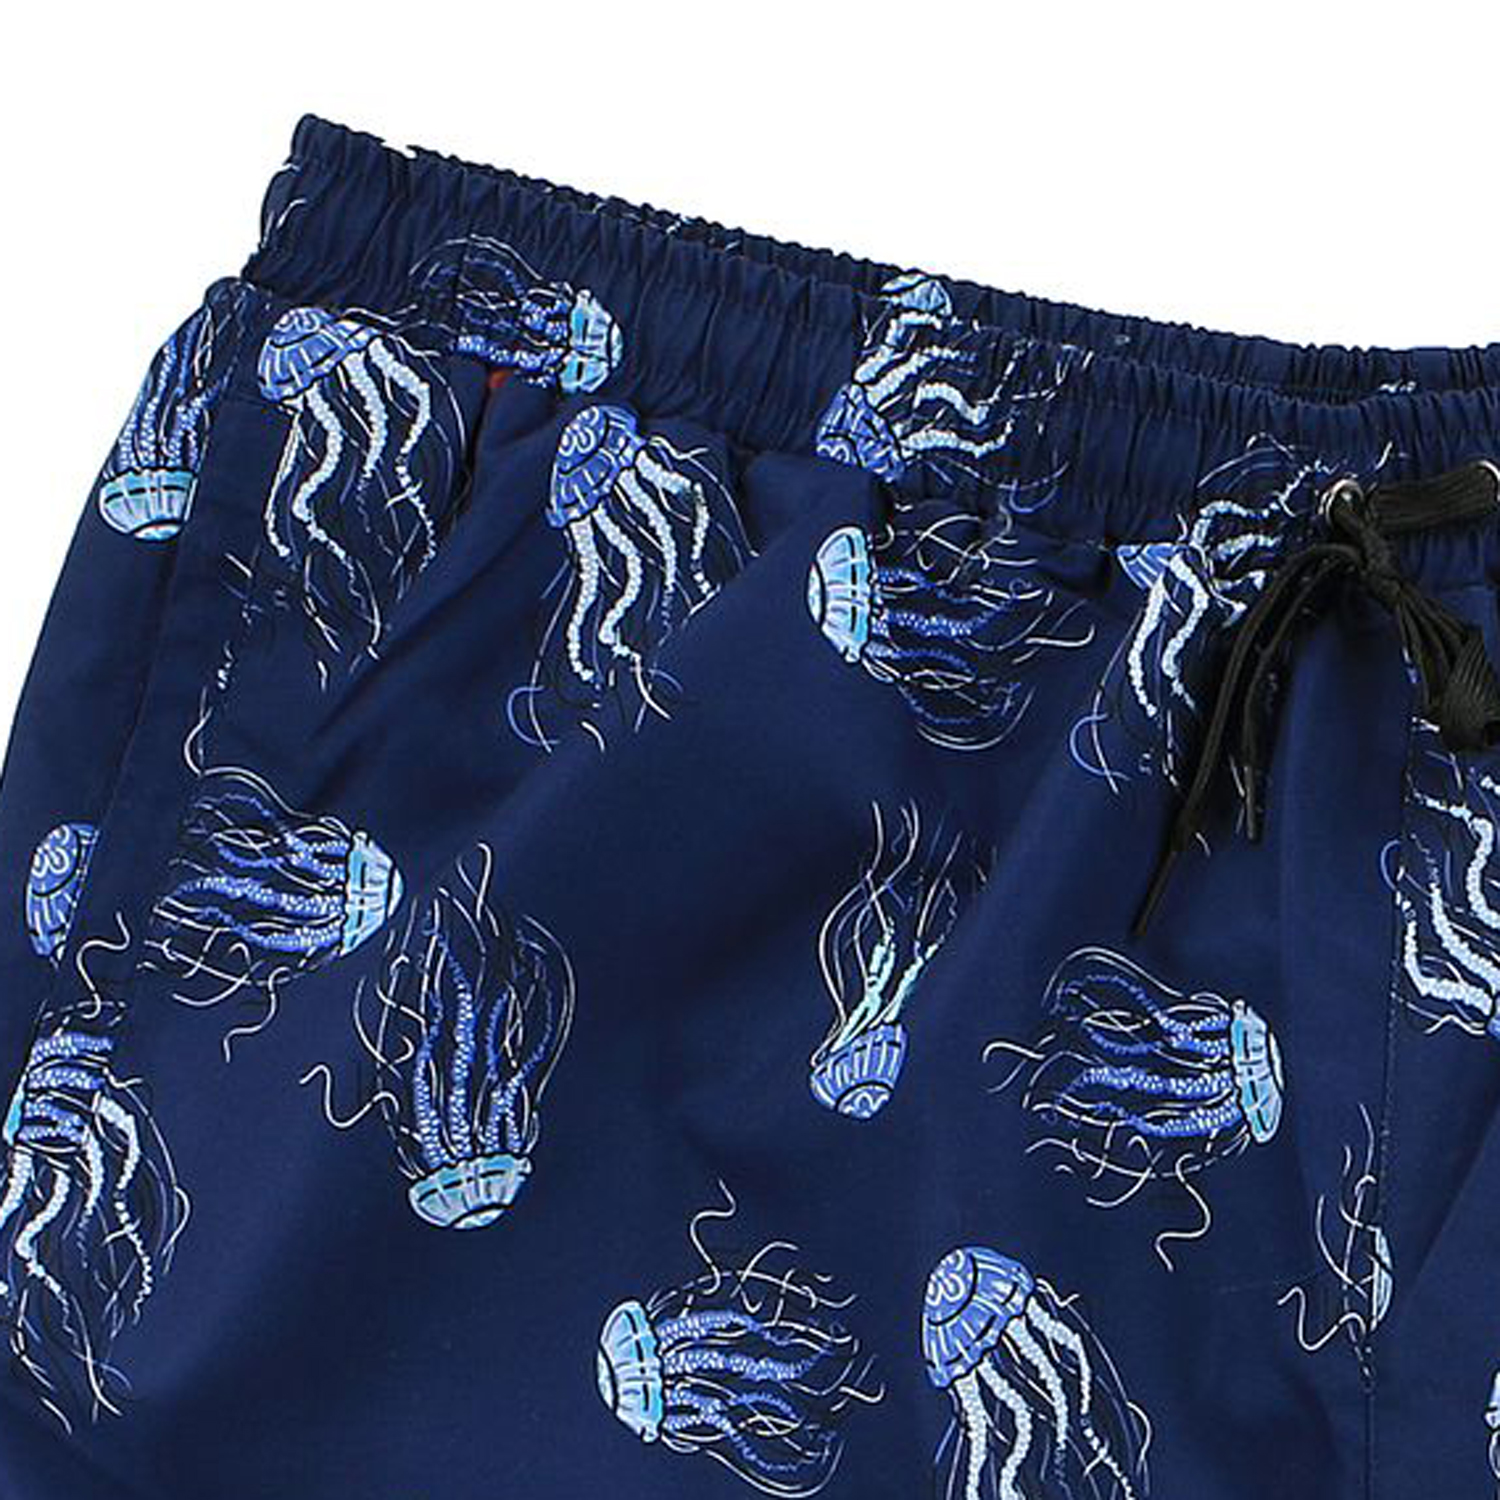 Swimming trunks in blue with jellyfish print by Abraxas up to oversize 10XL